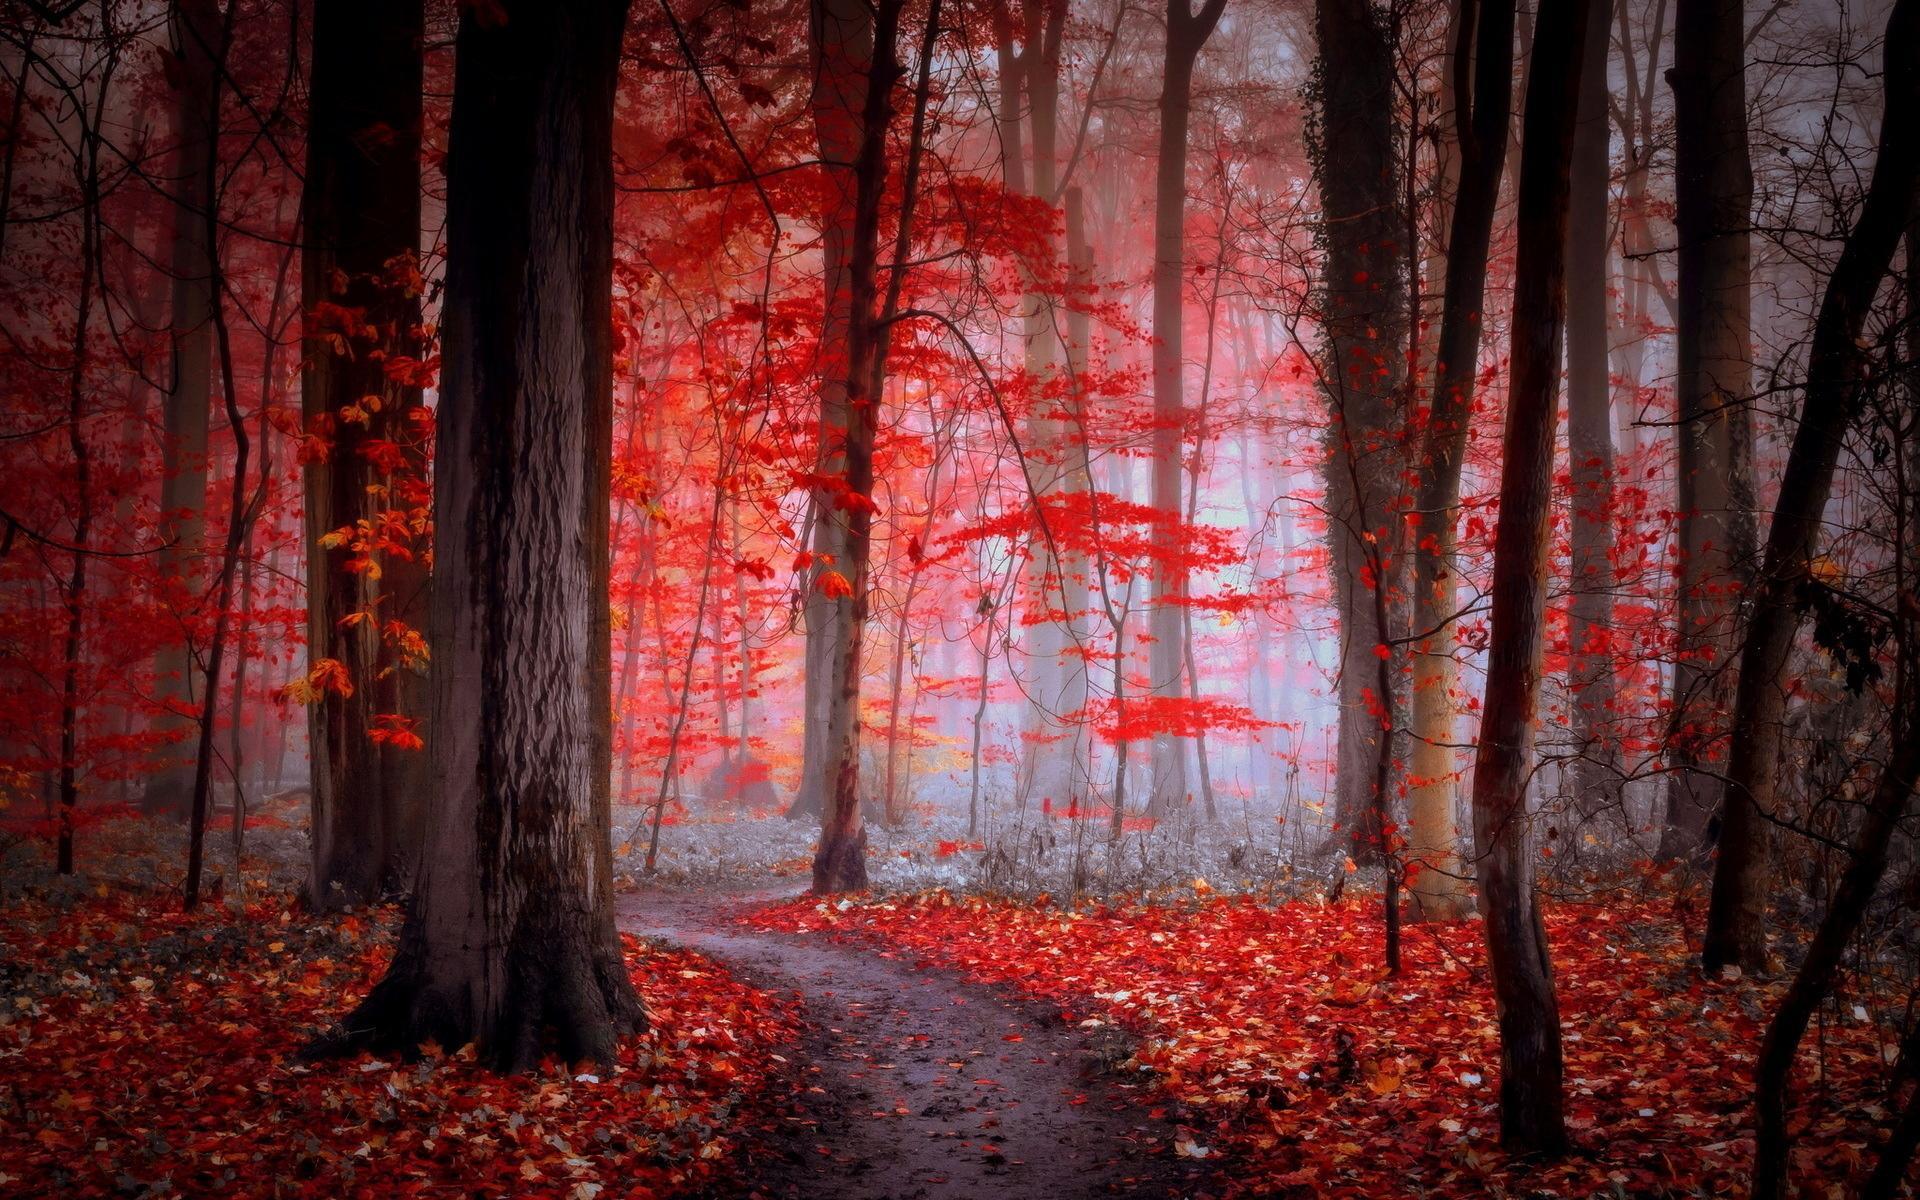 Path in the red forest HD desktop wallpaper, Widescreen, High